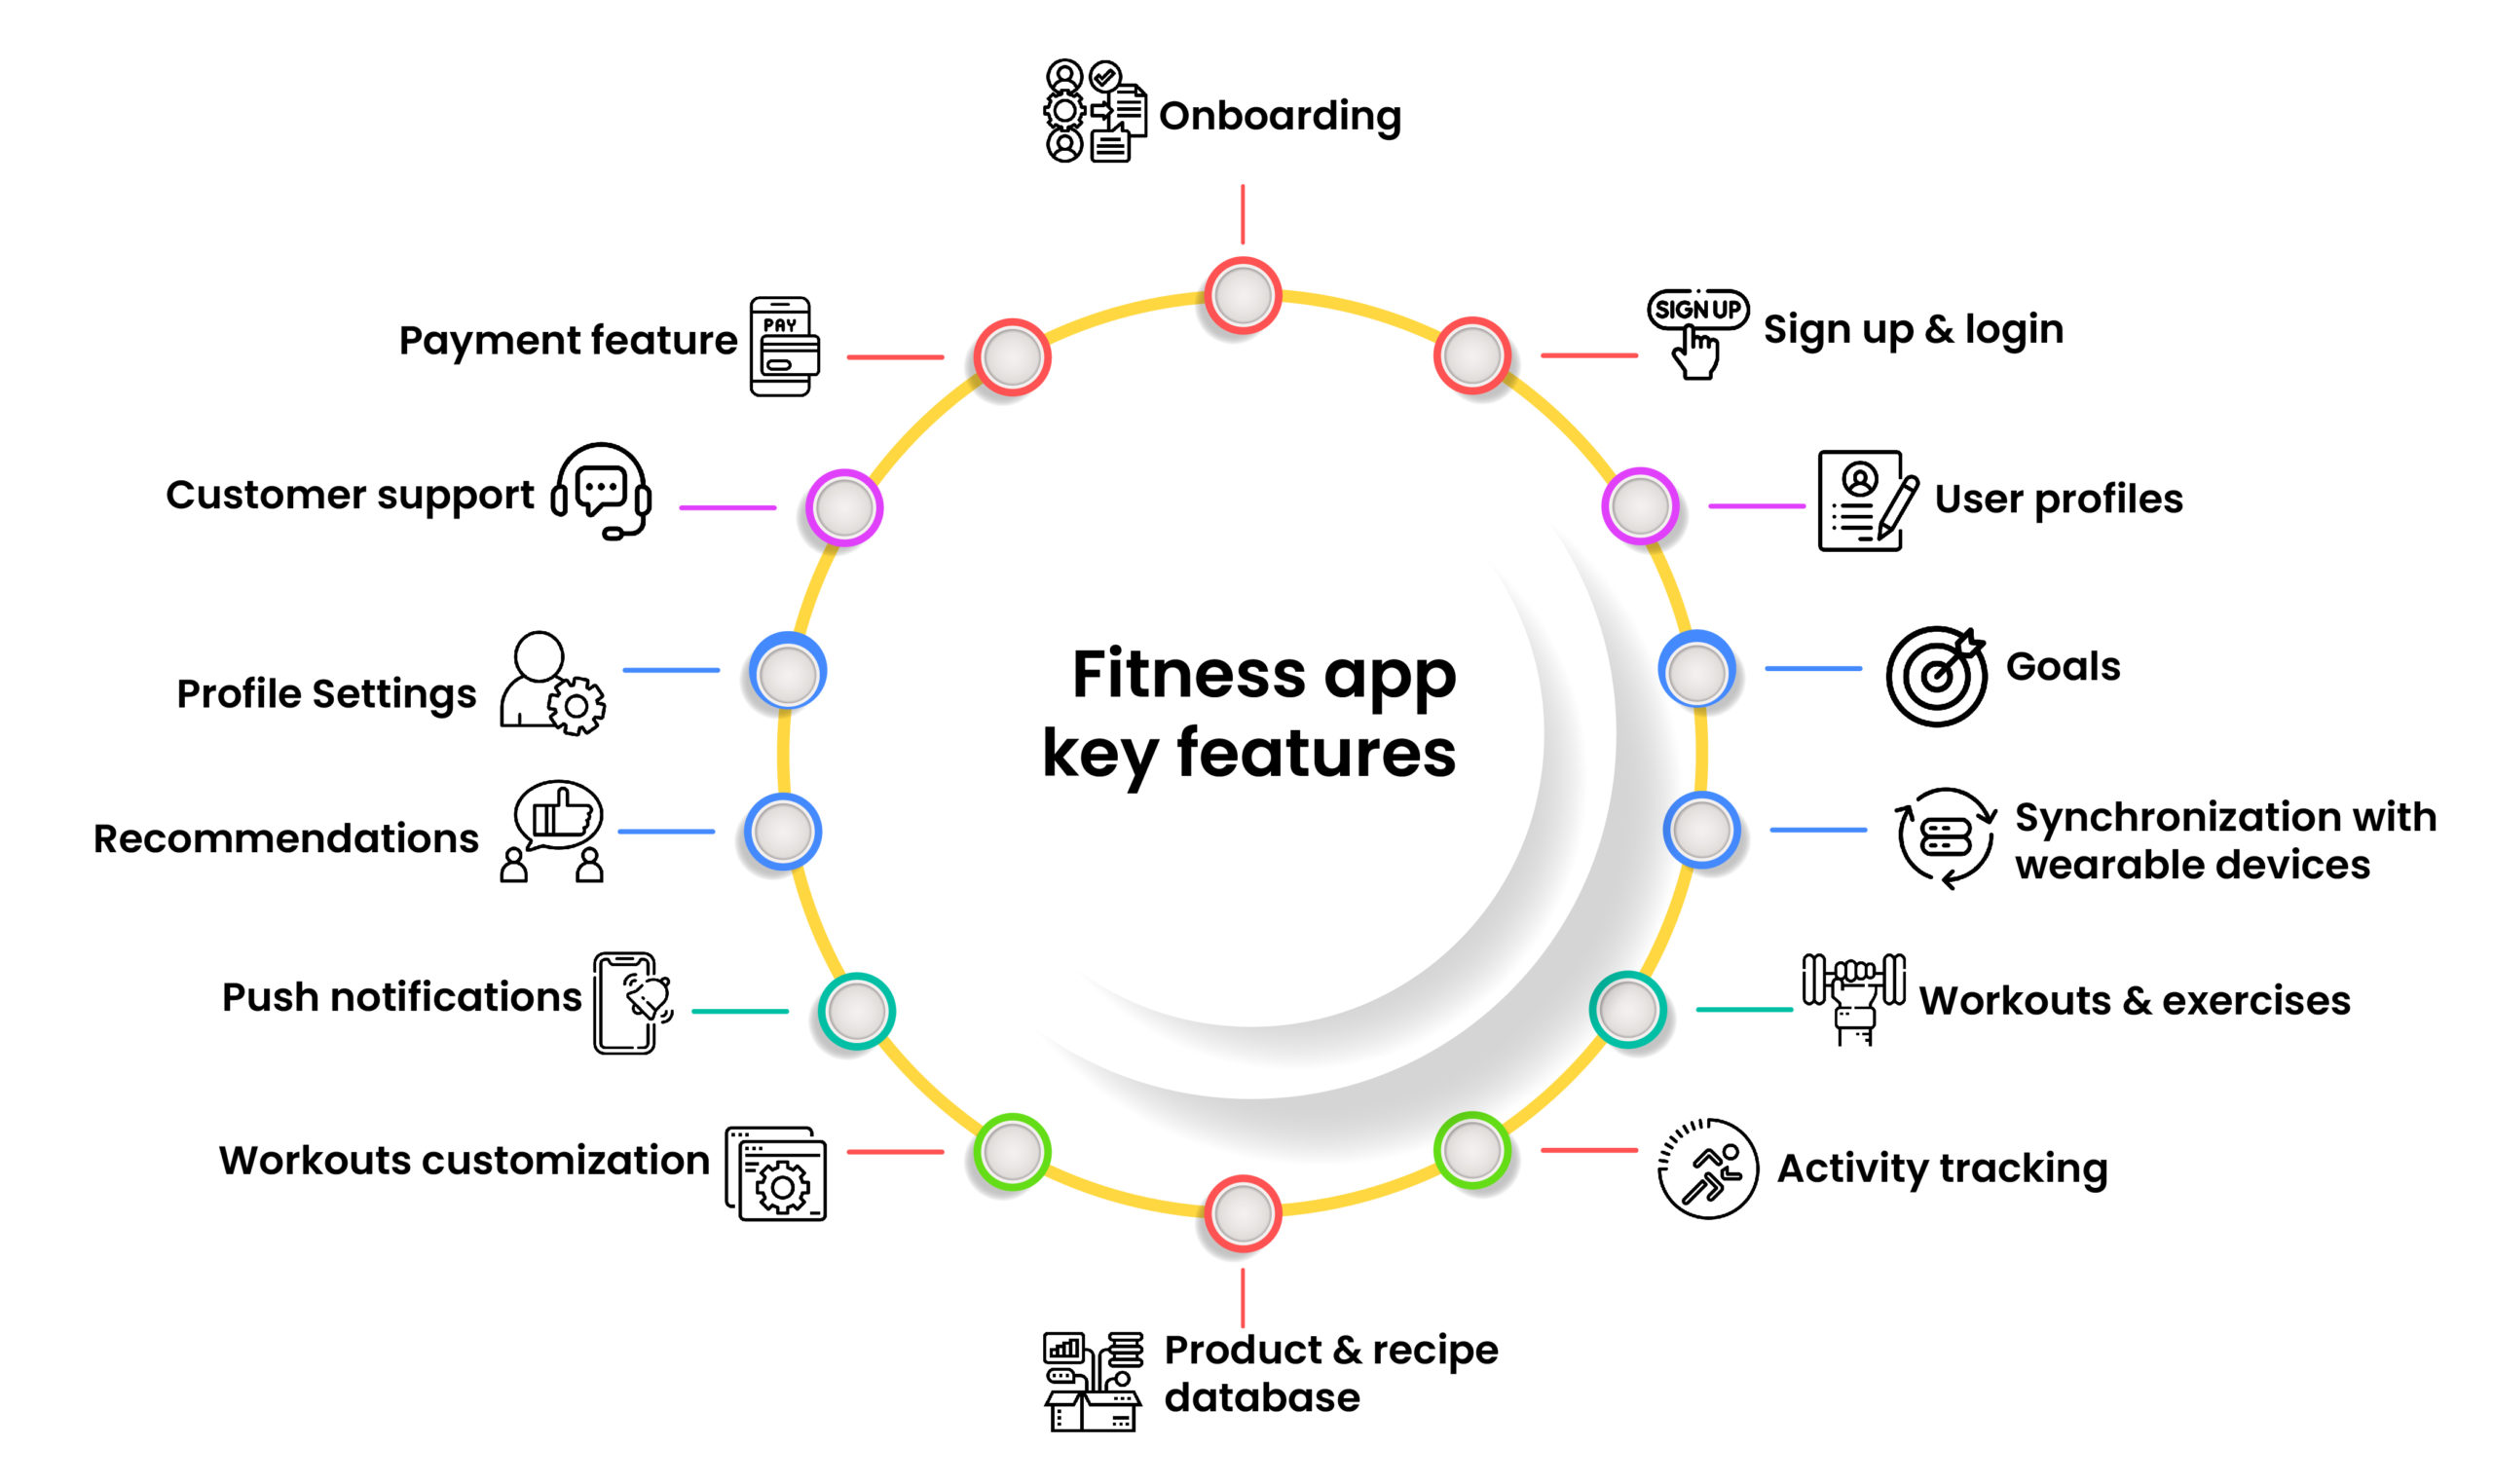 Fitness app key features